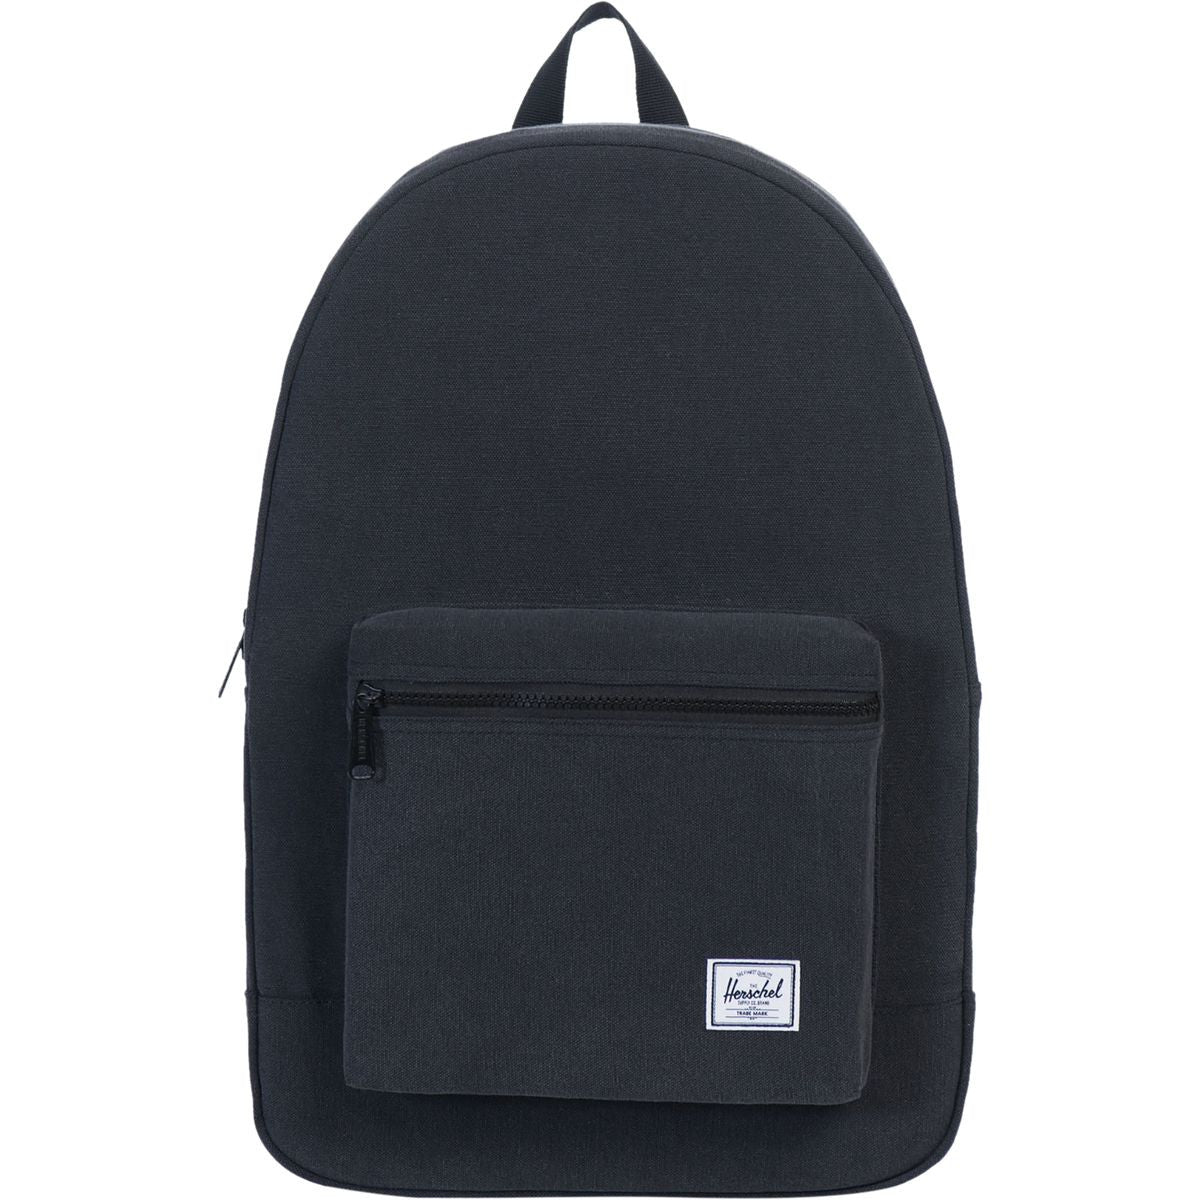 Herschel Supply Co. - Packable Daypack, Black Canvas - The Giant Peach